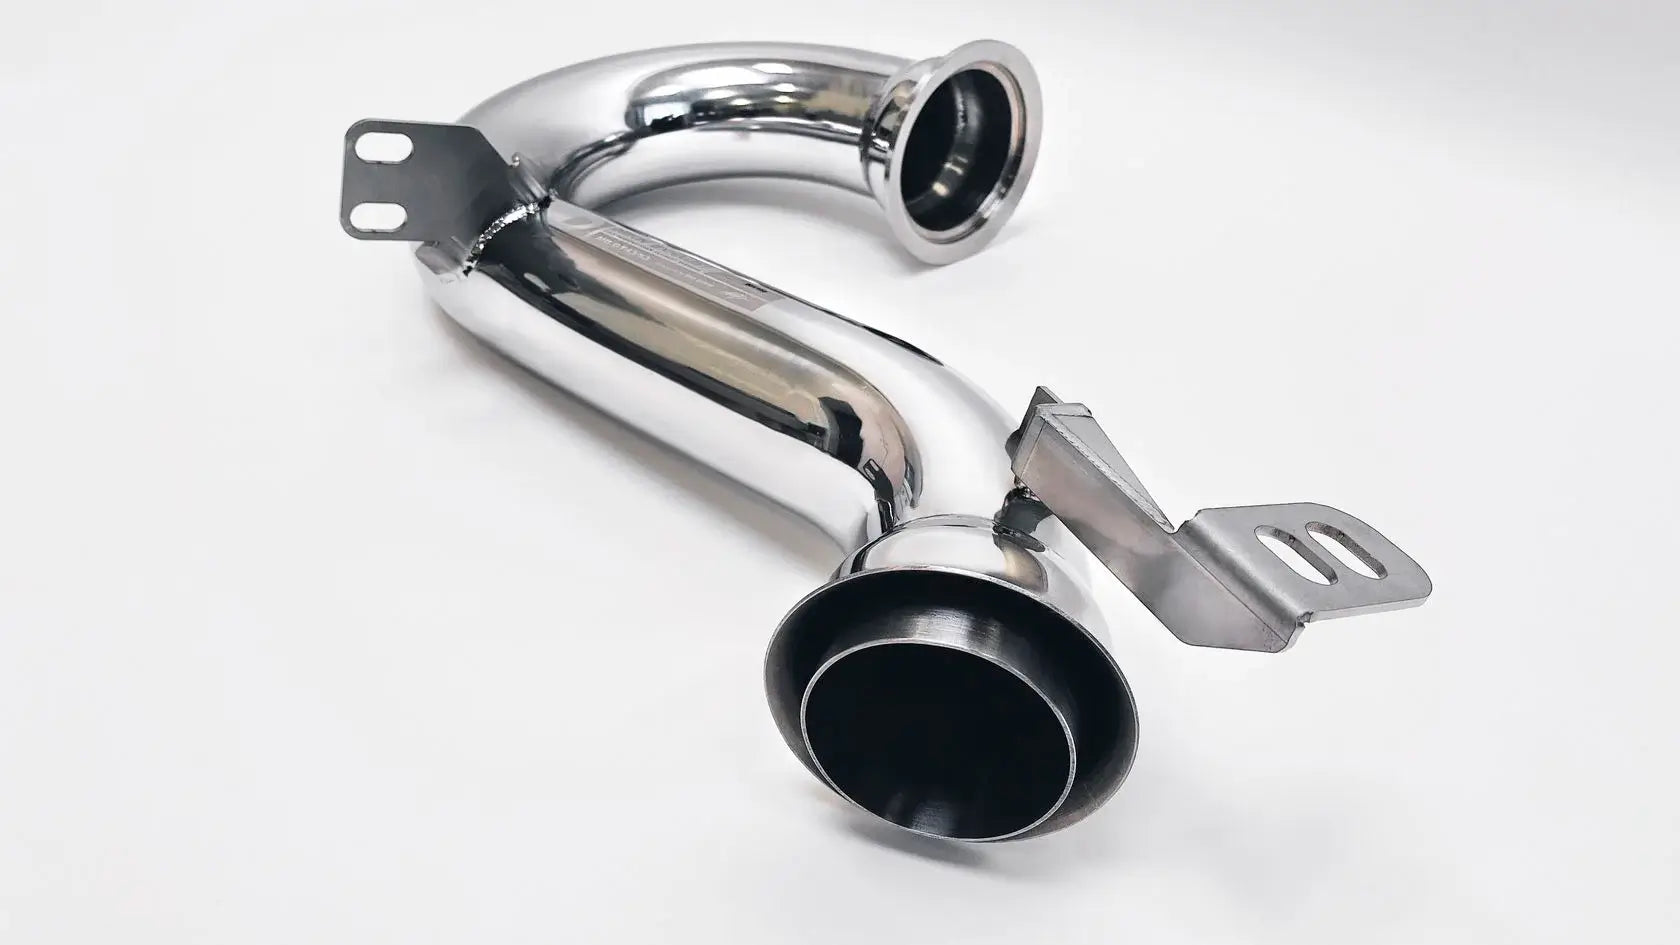 DEIKIN 10-MB.GT53.X290-DP Downpipe for Mercedes-AMG GT53 (x290) without HeatShield Photo-0 